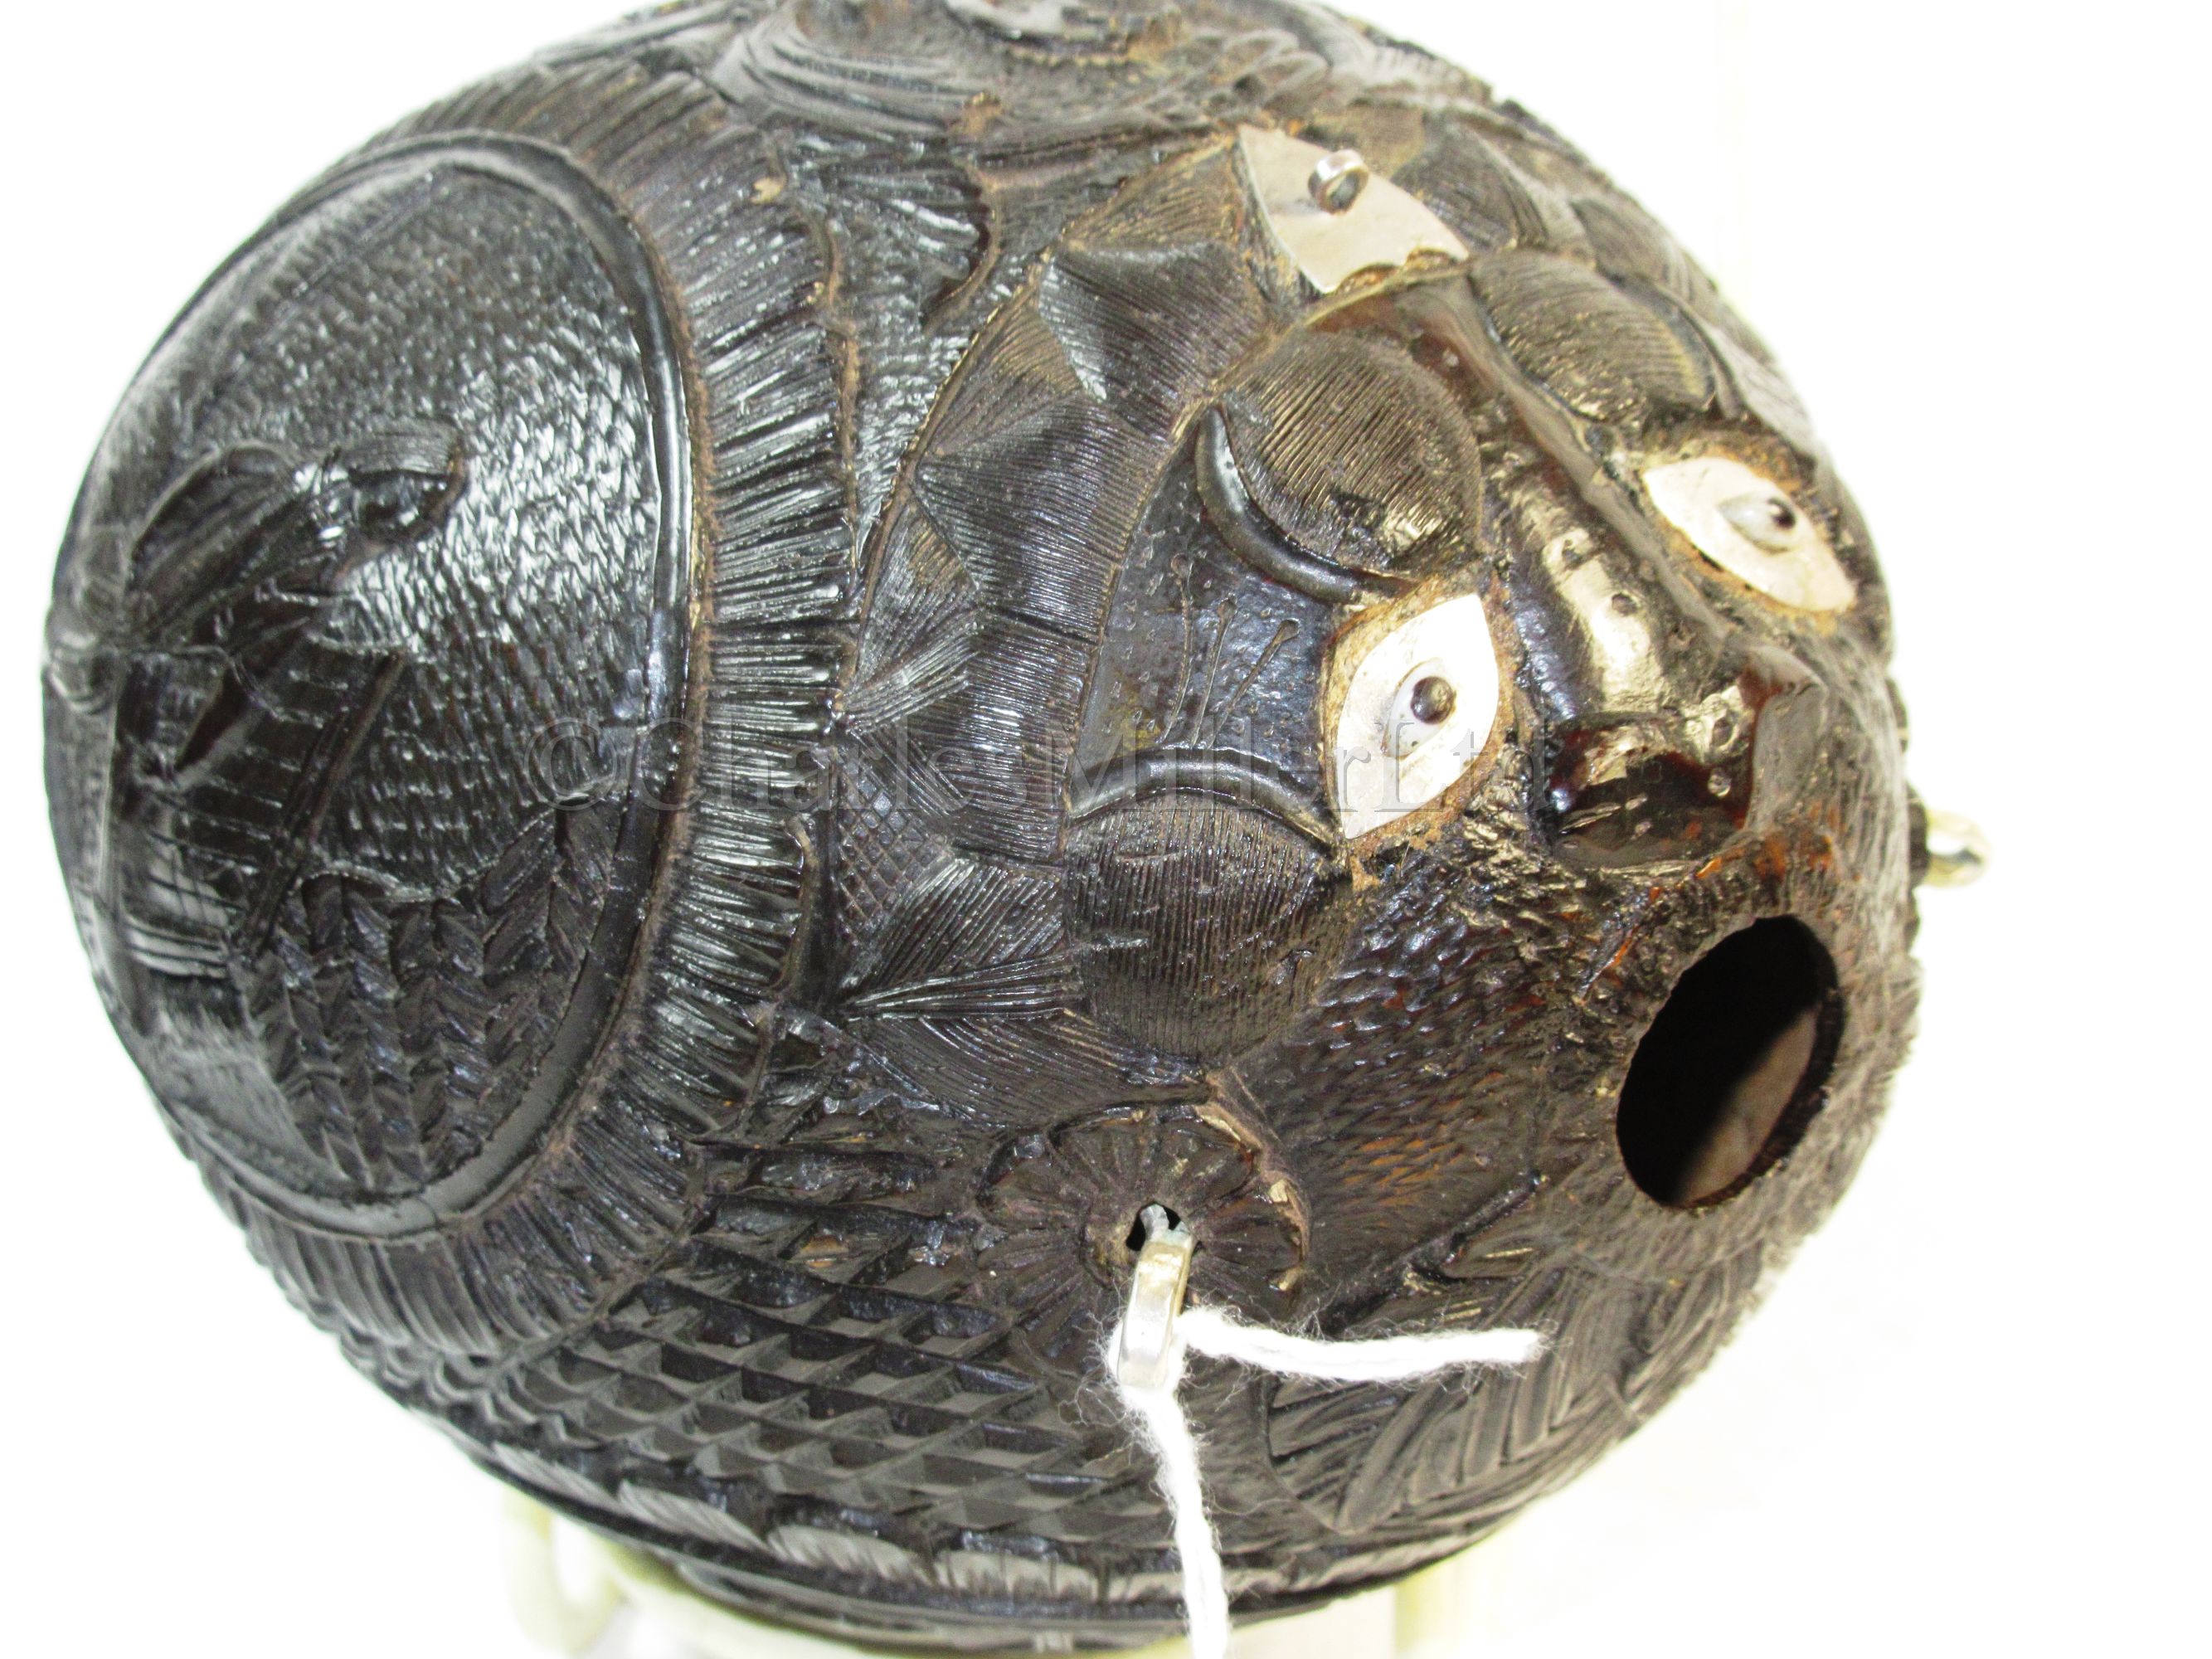 A 19TH CENTURY FRENCH CARVED COCONUT BUGBEAR - Image 7 of 7